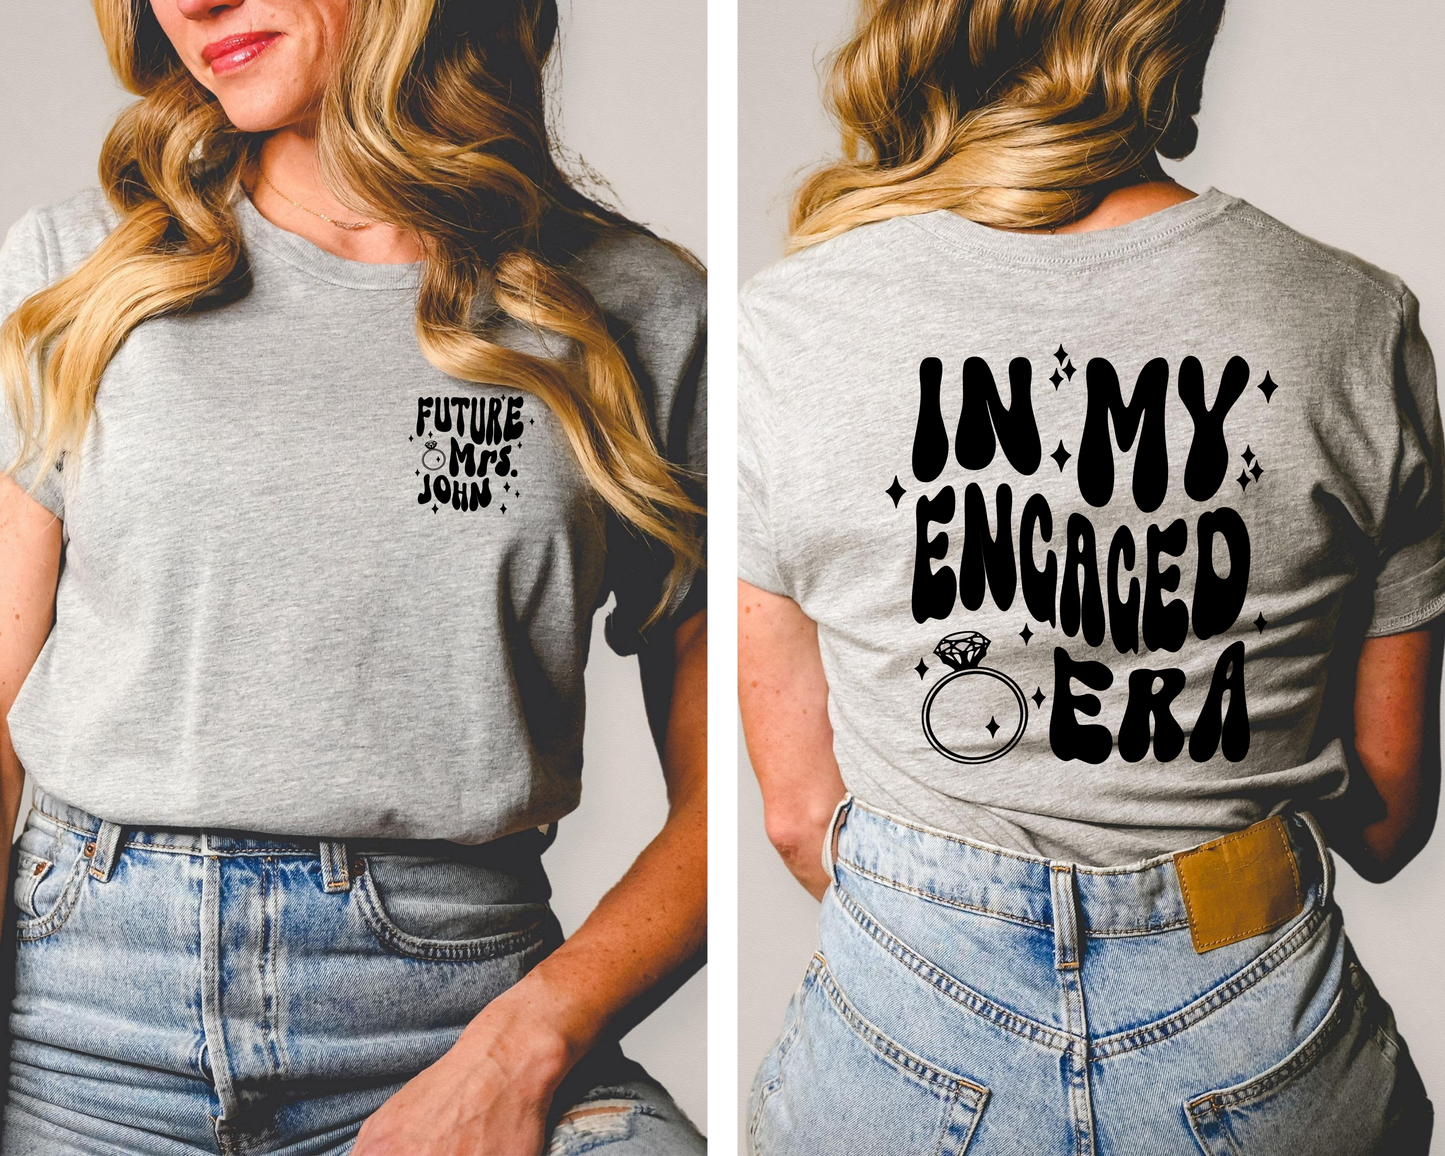 Celebrate the bride-to-be's engagement with our stylish and trendy "In My Engaged Era" T-shirt.